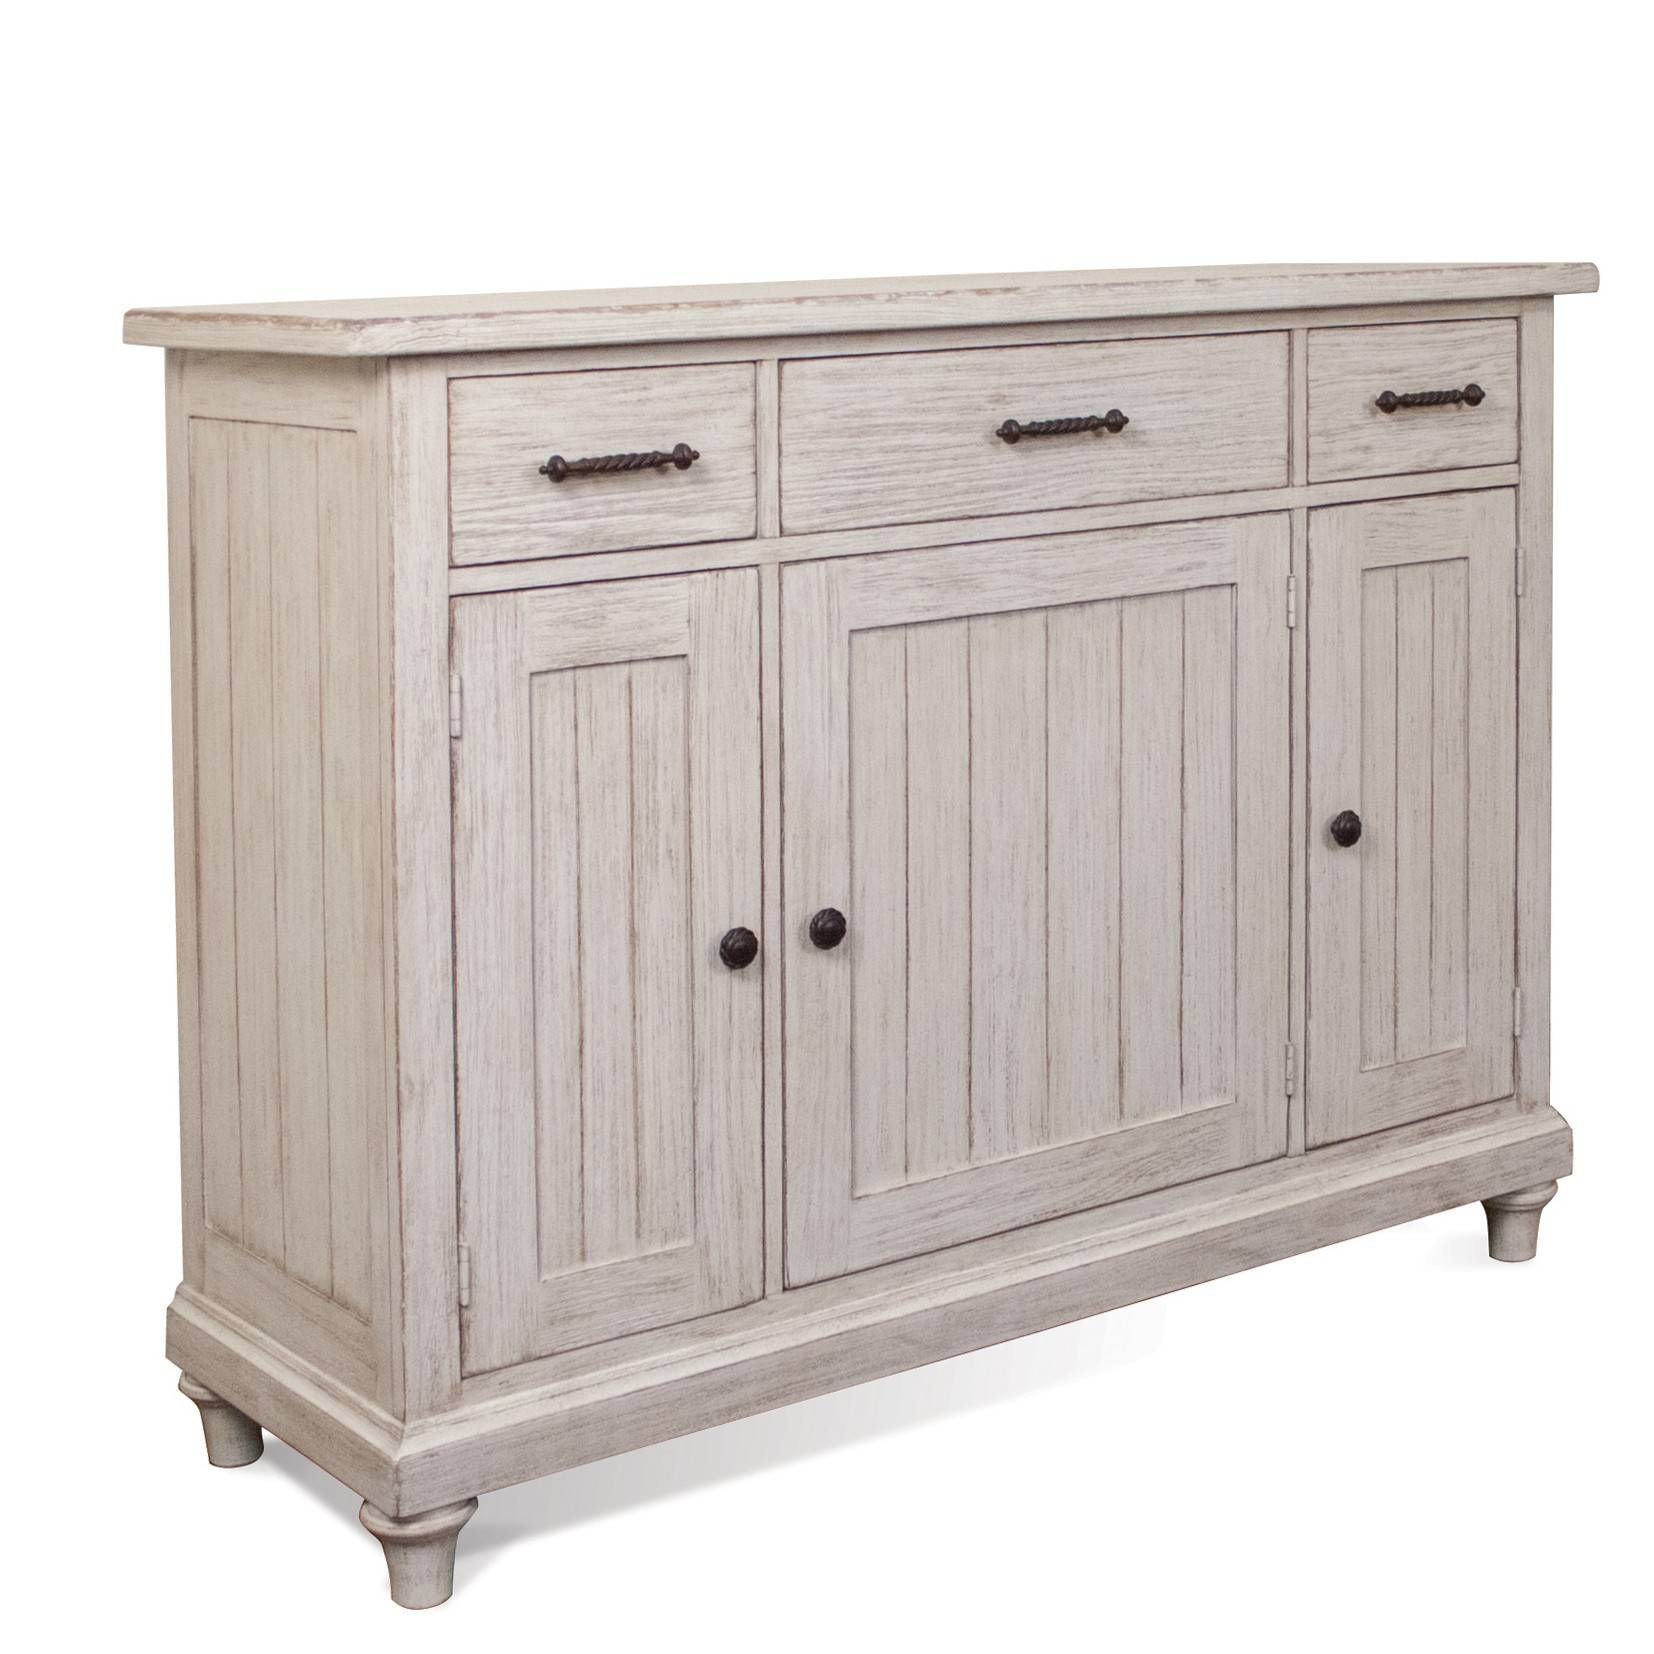 Aberdeen Wood Sideboard Server In Weathered Worn White | Humble Abode Within Current Server Sideboard Furniture (View 8 of 15)